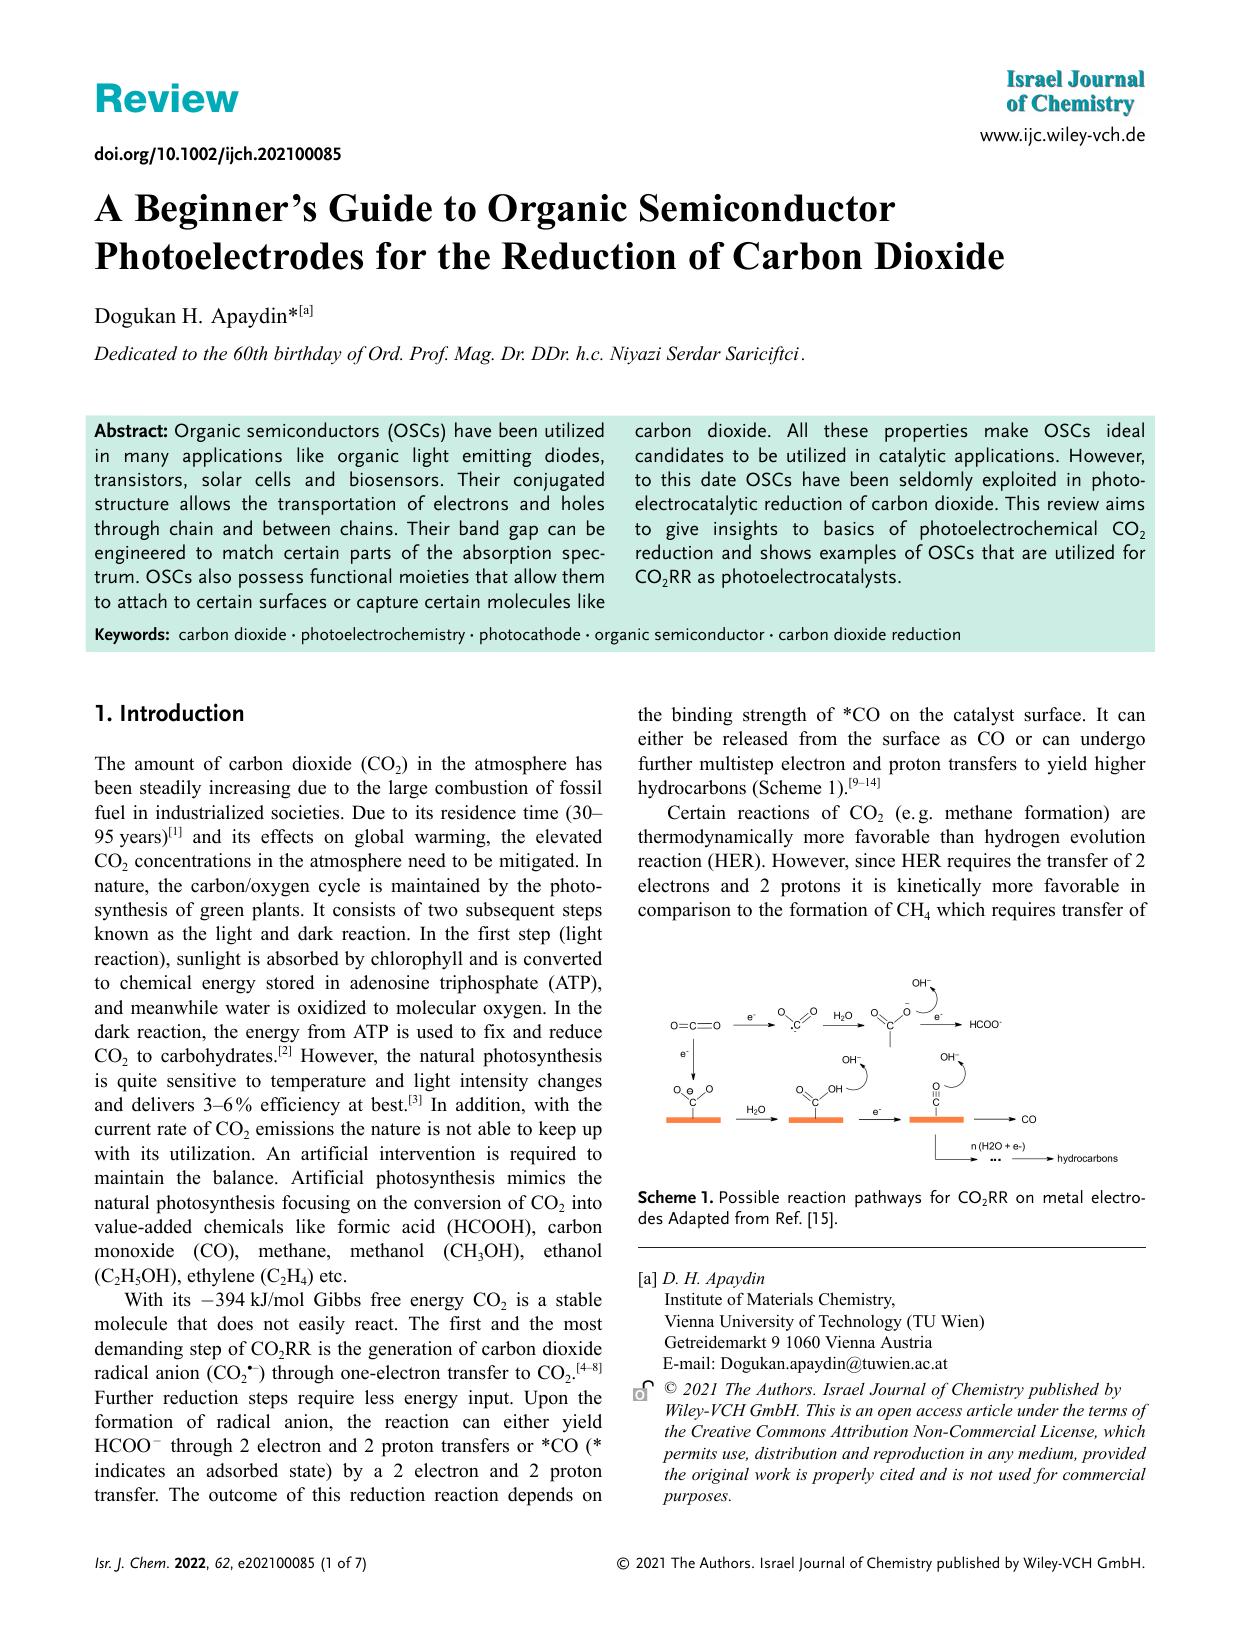 A Beginner's Guide to Organic Semiconductor Photoelectrodes for the Reduction of Carbon Dioxide by Unknown